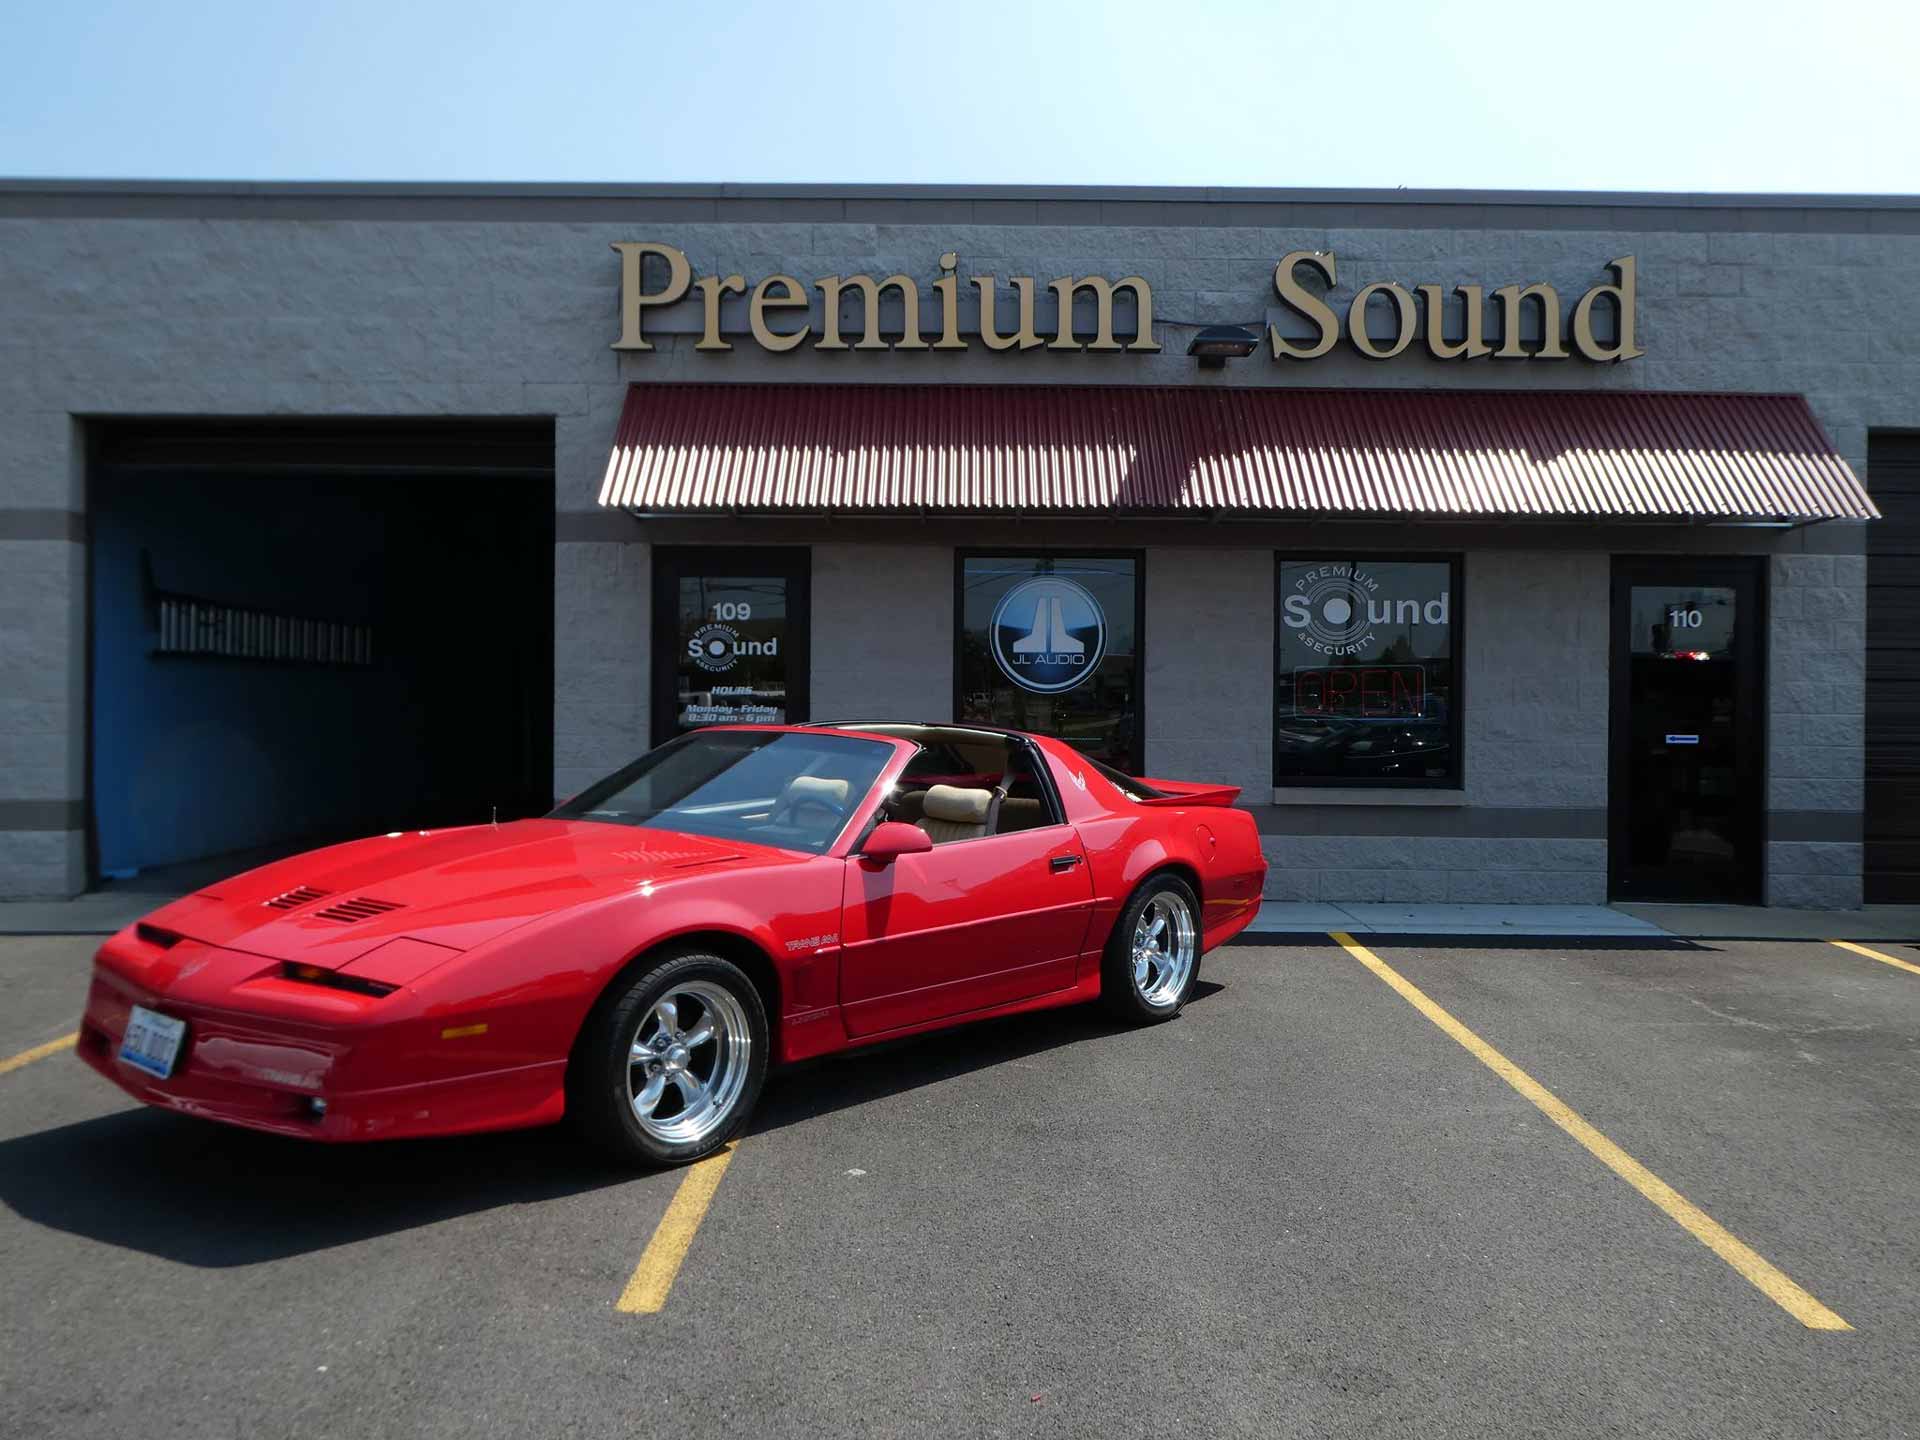 Premium Sound & Security storefront with a red sports car parked in front